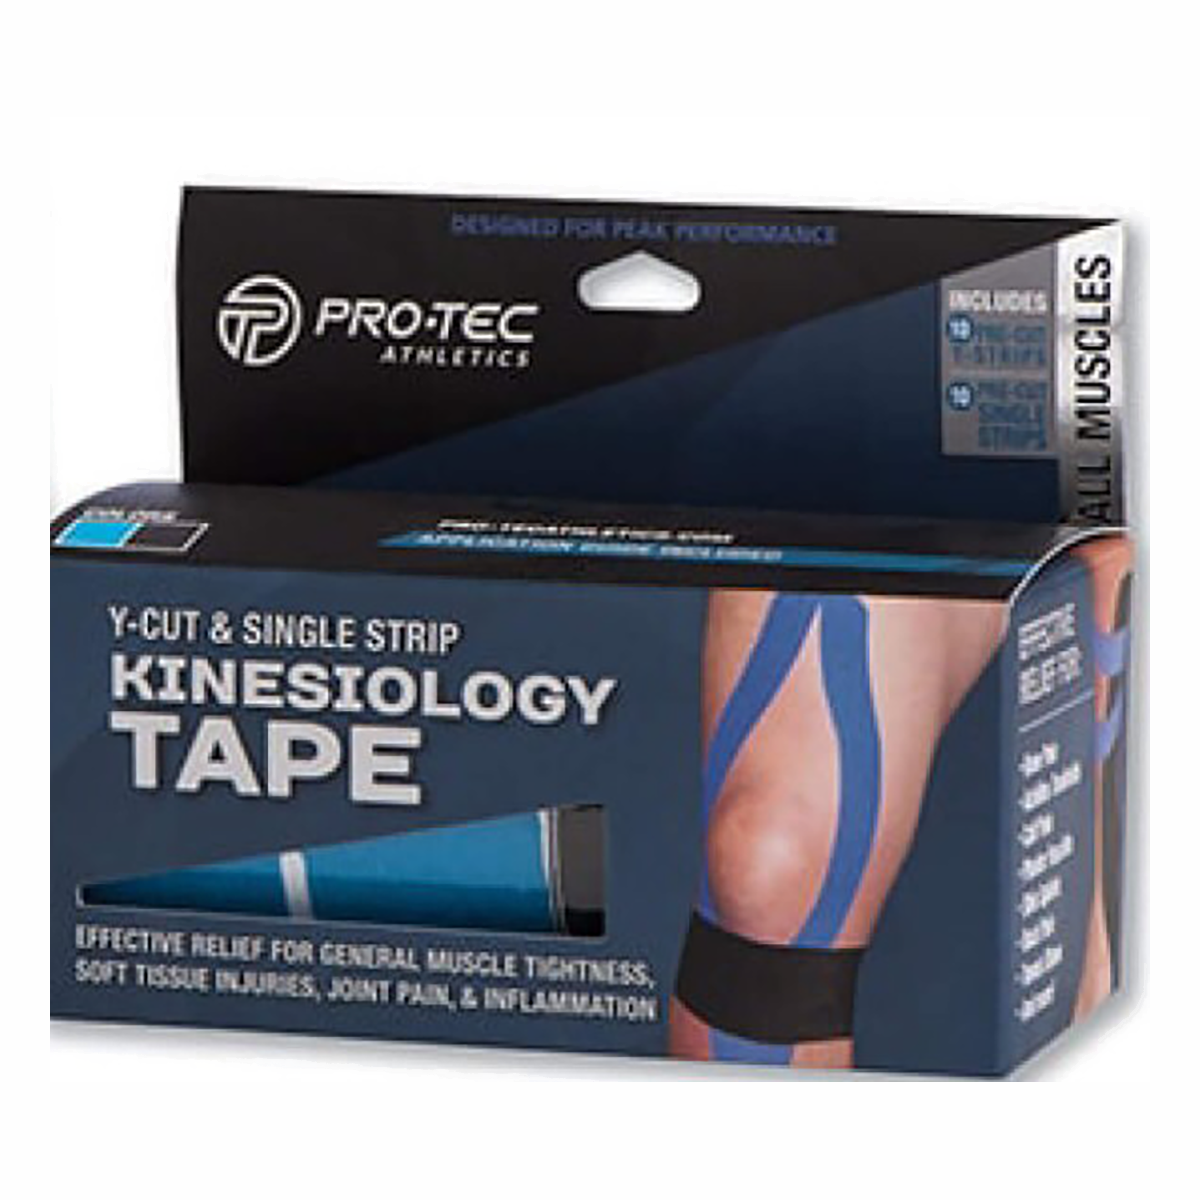 Pro-Tec Pre-Cut Kinesiology Tape, , large image number null